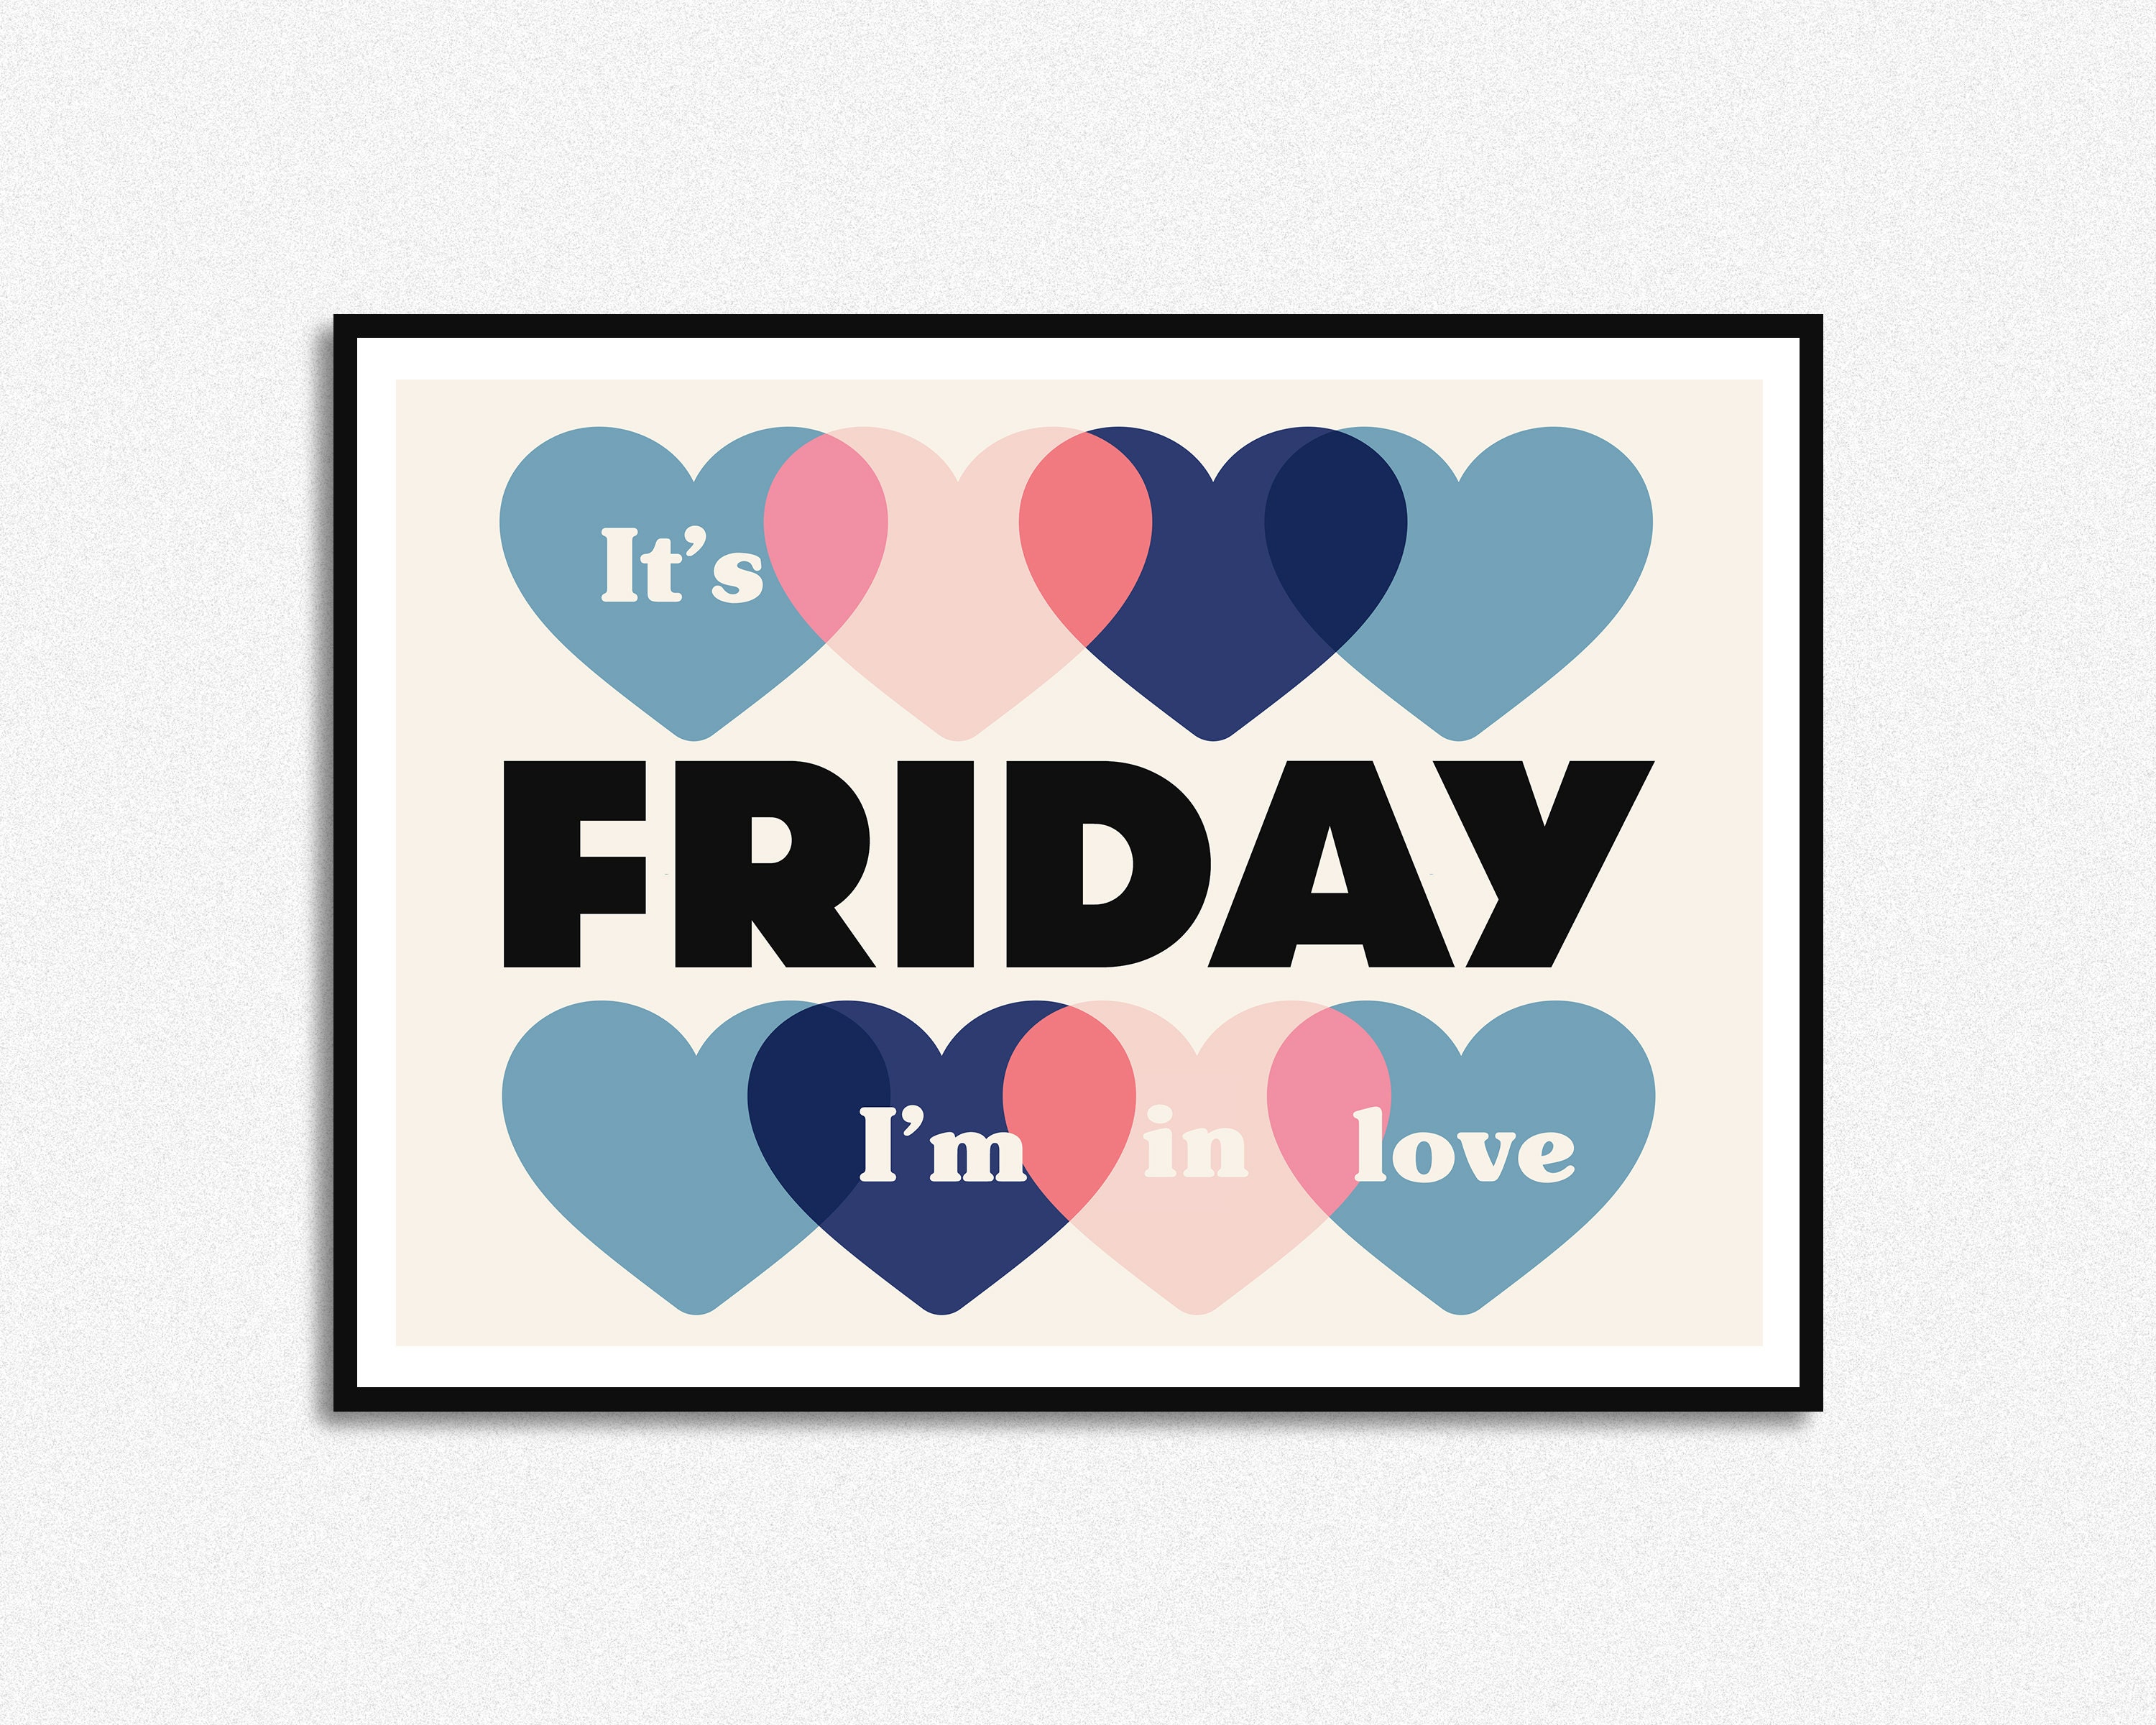 Friday i m in love the cure. Friday i'm in Love. The Cure Friday i'm in Love логотип. Friday i'm in Love перевод.